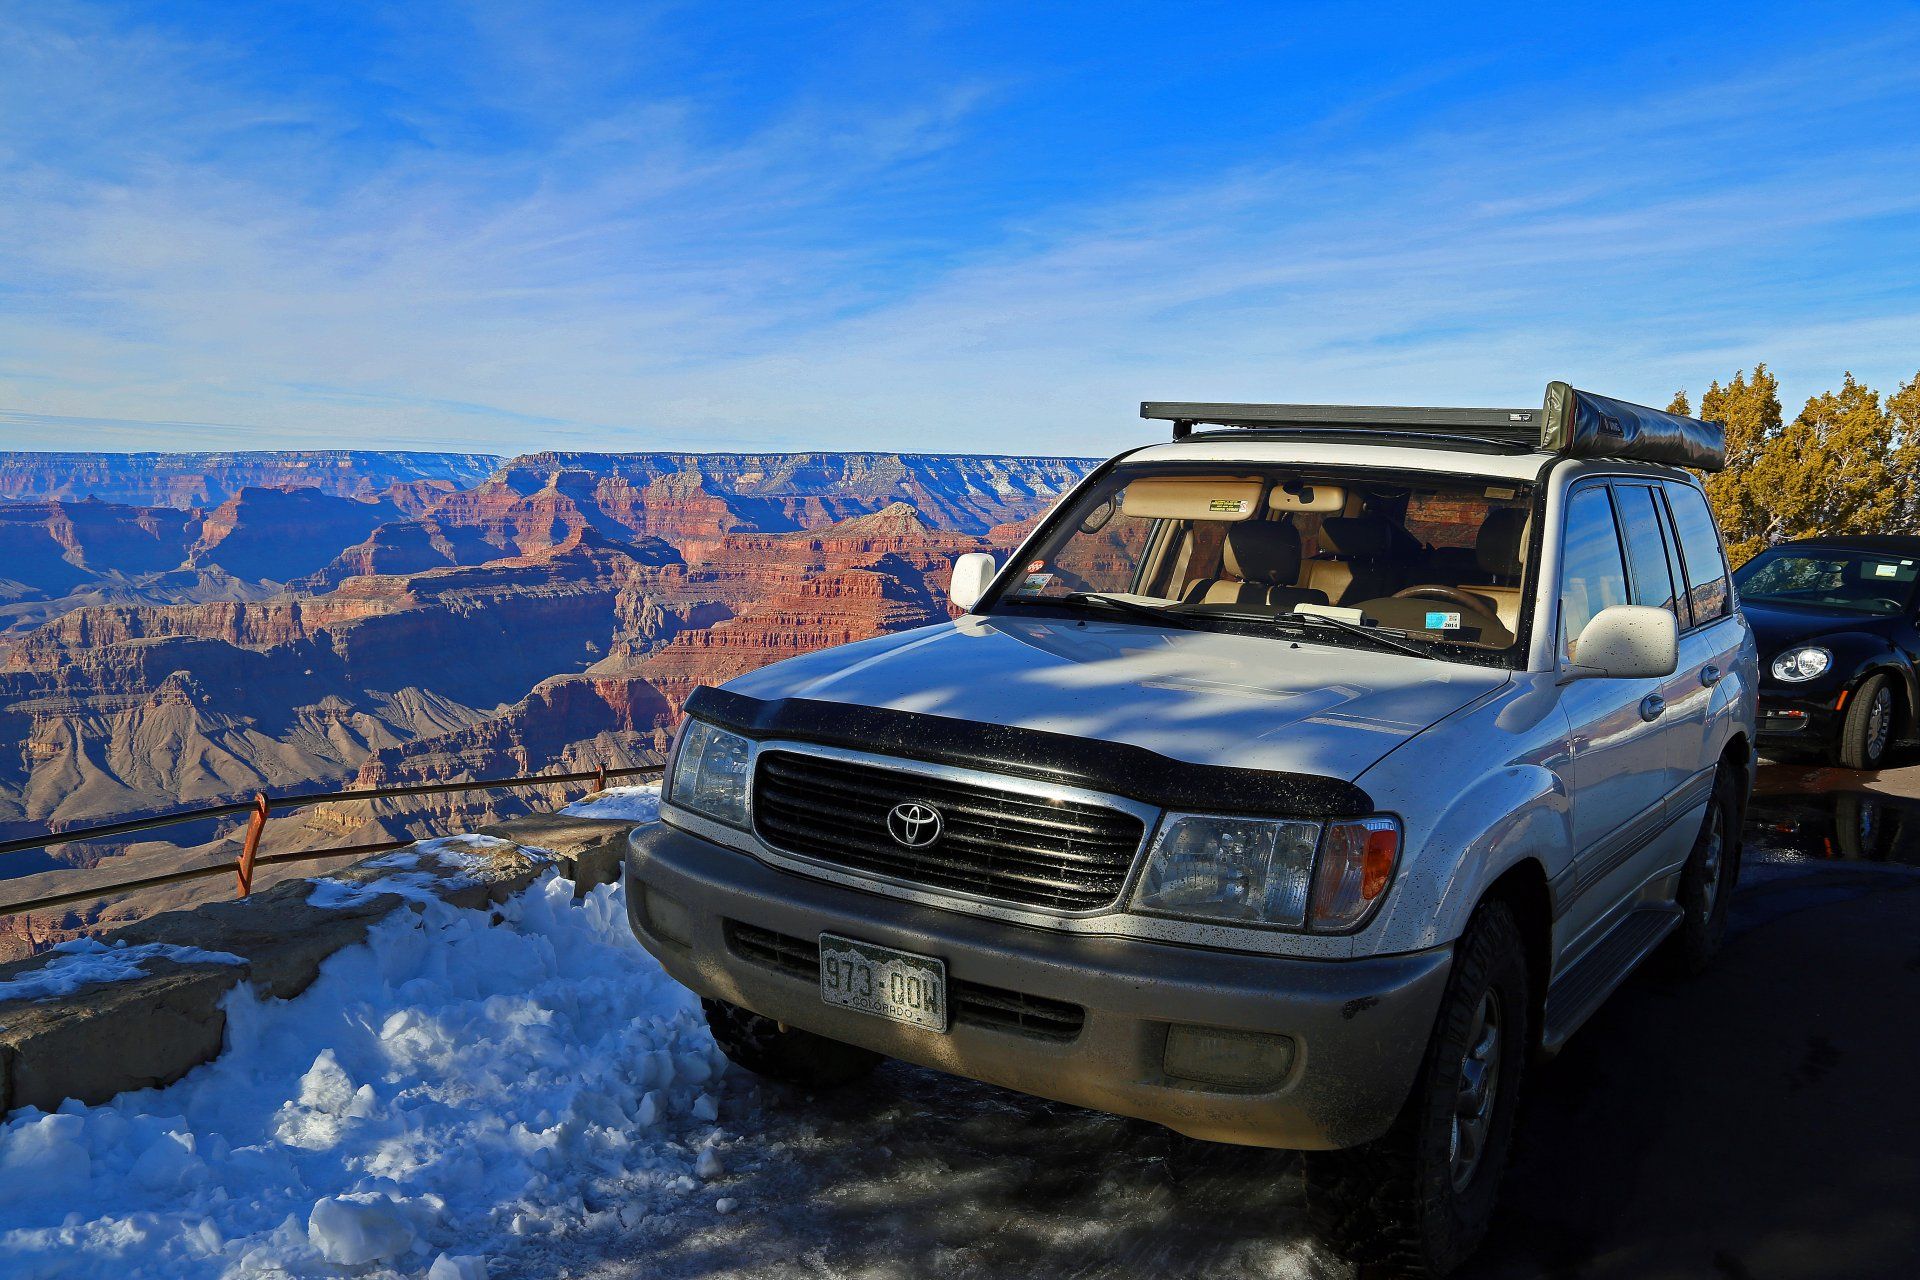 Grand Canyon in the snow